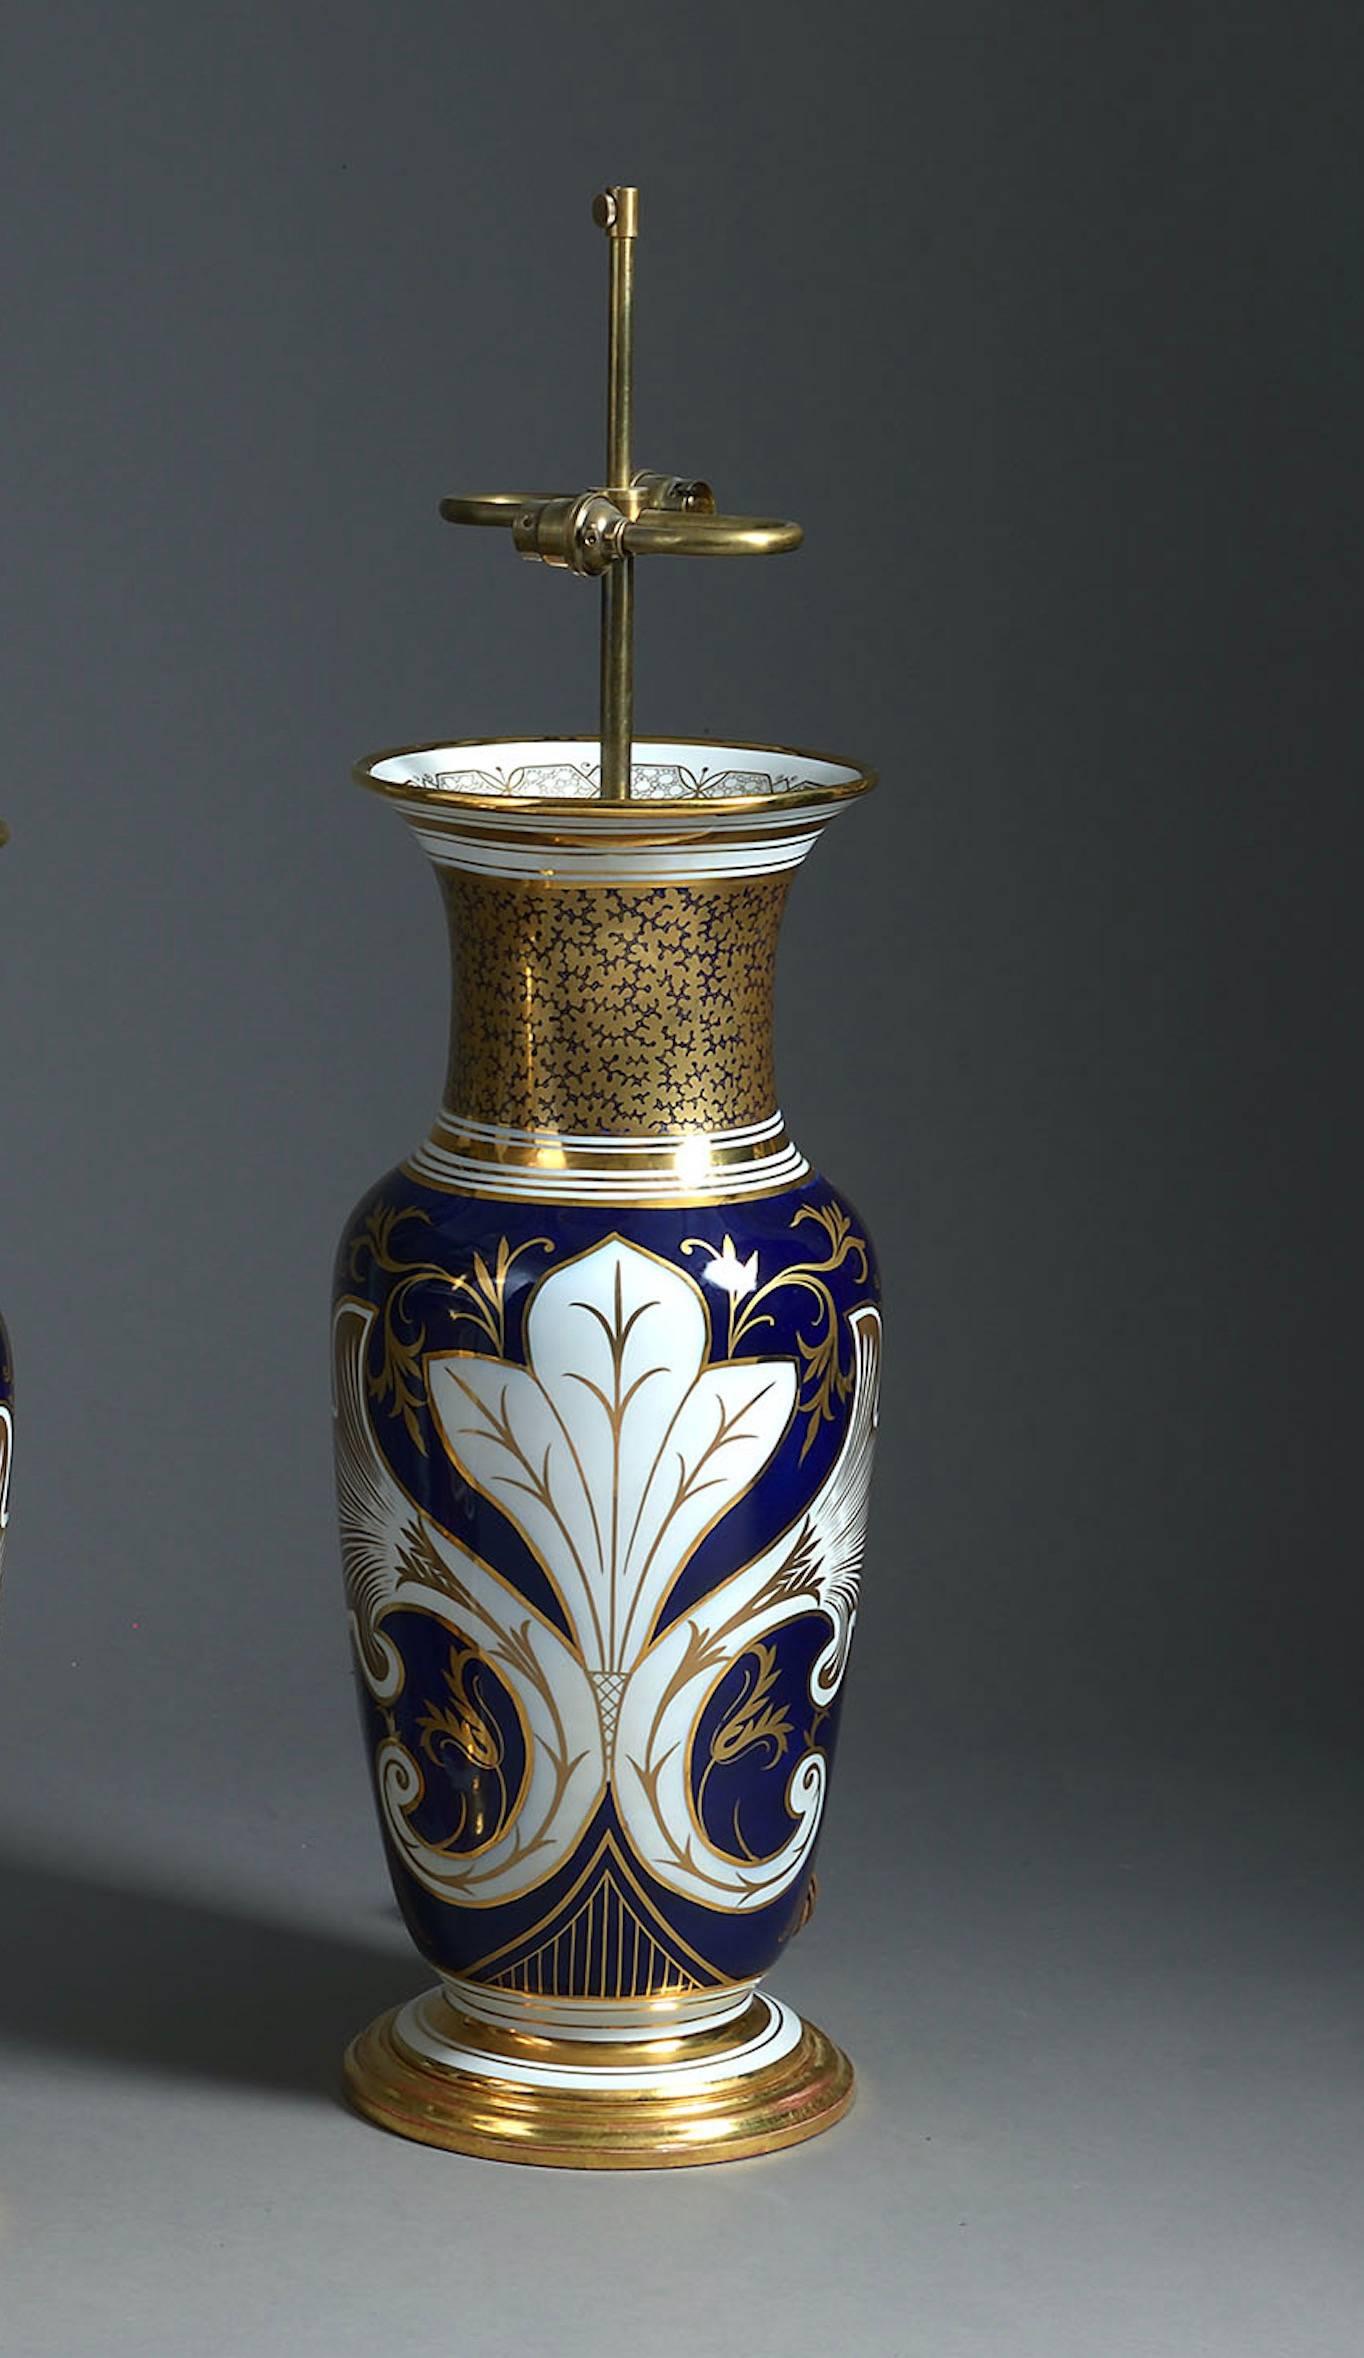 An exceptional pair of large scale Paris porcelain vases decorated with floral panels on one side and a stylised floral motif to the other side. Each body with gilded seaweed decoration to the neck and a dark blue ground. Now mounted as lamps gilded